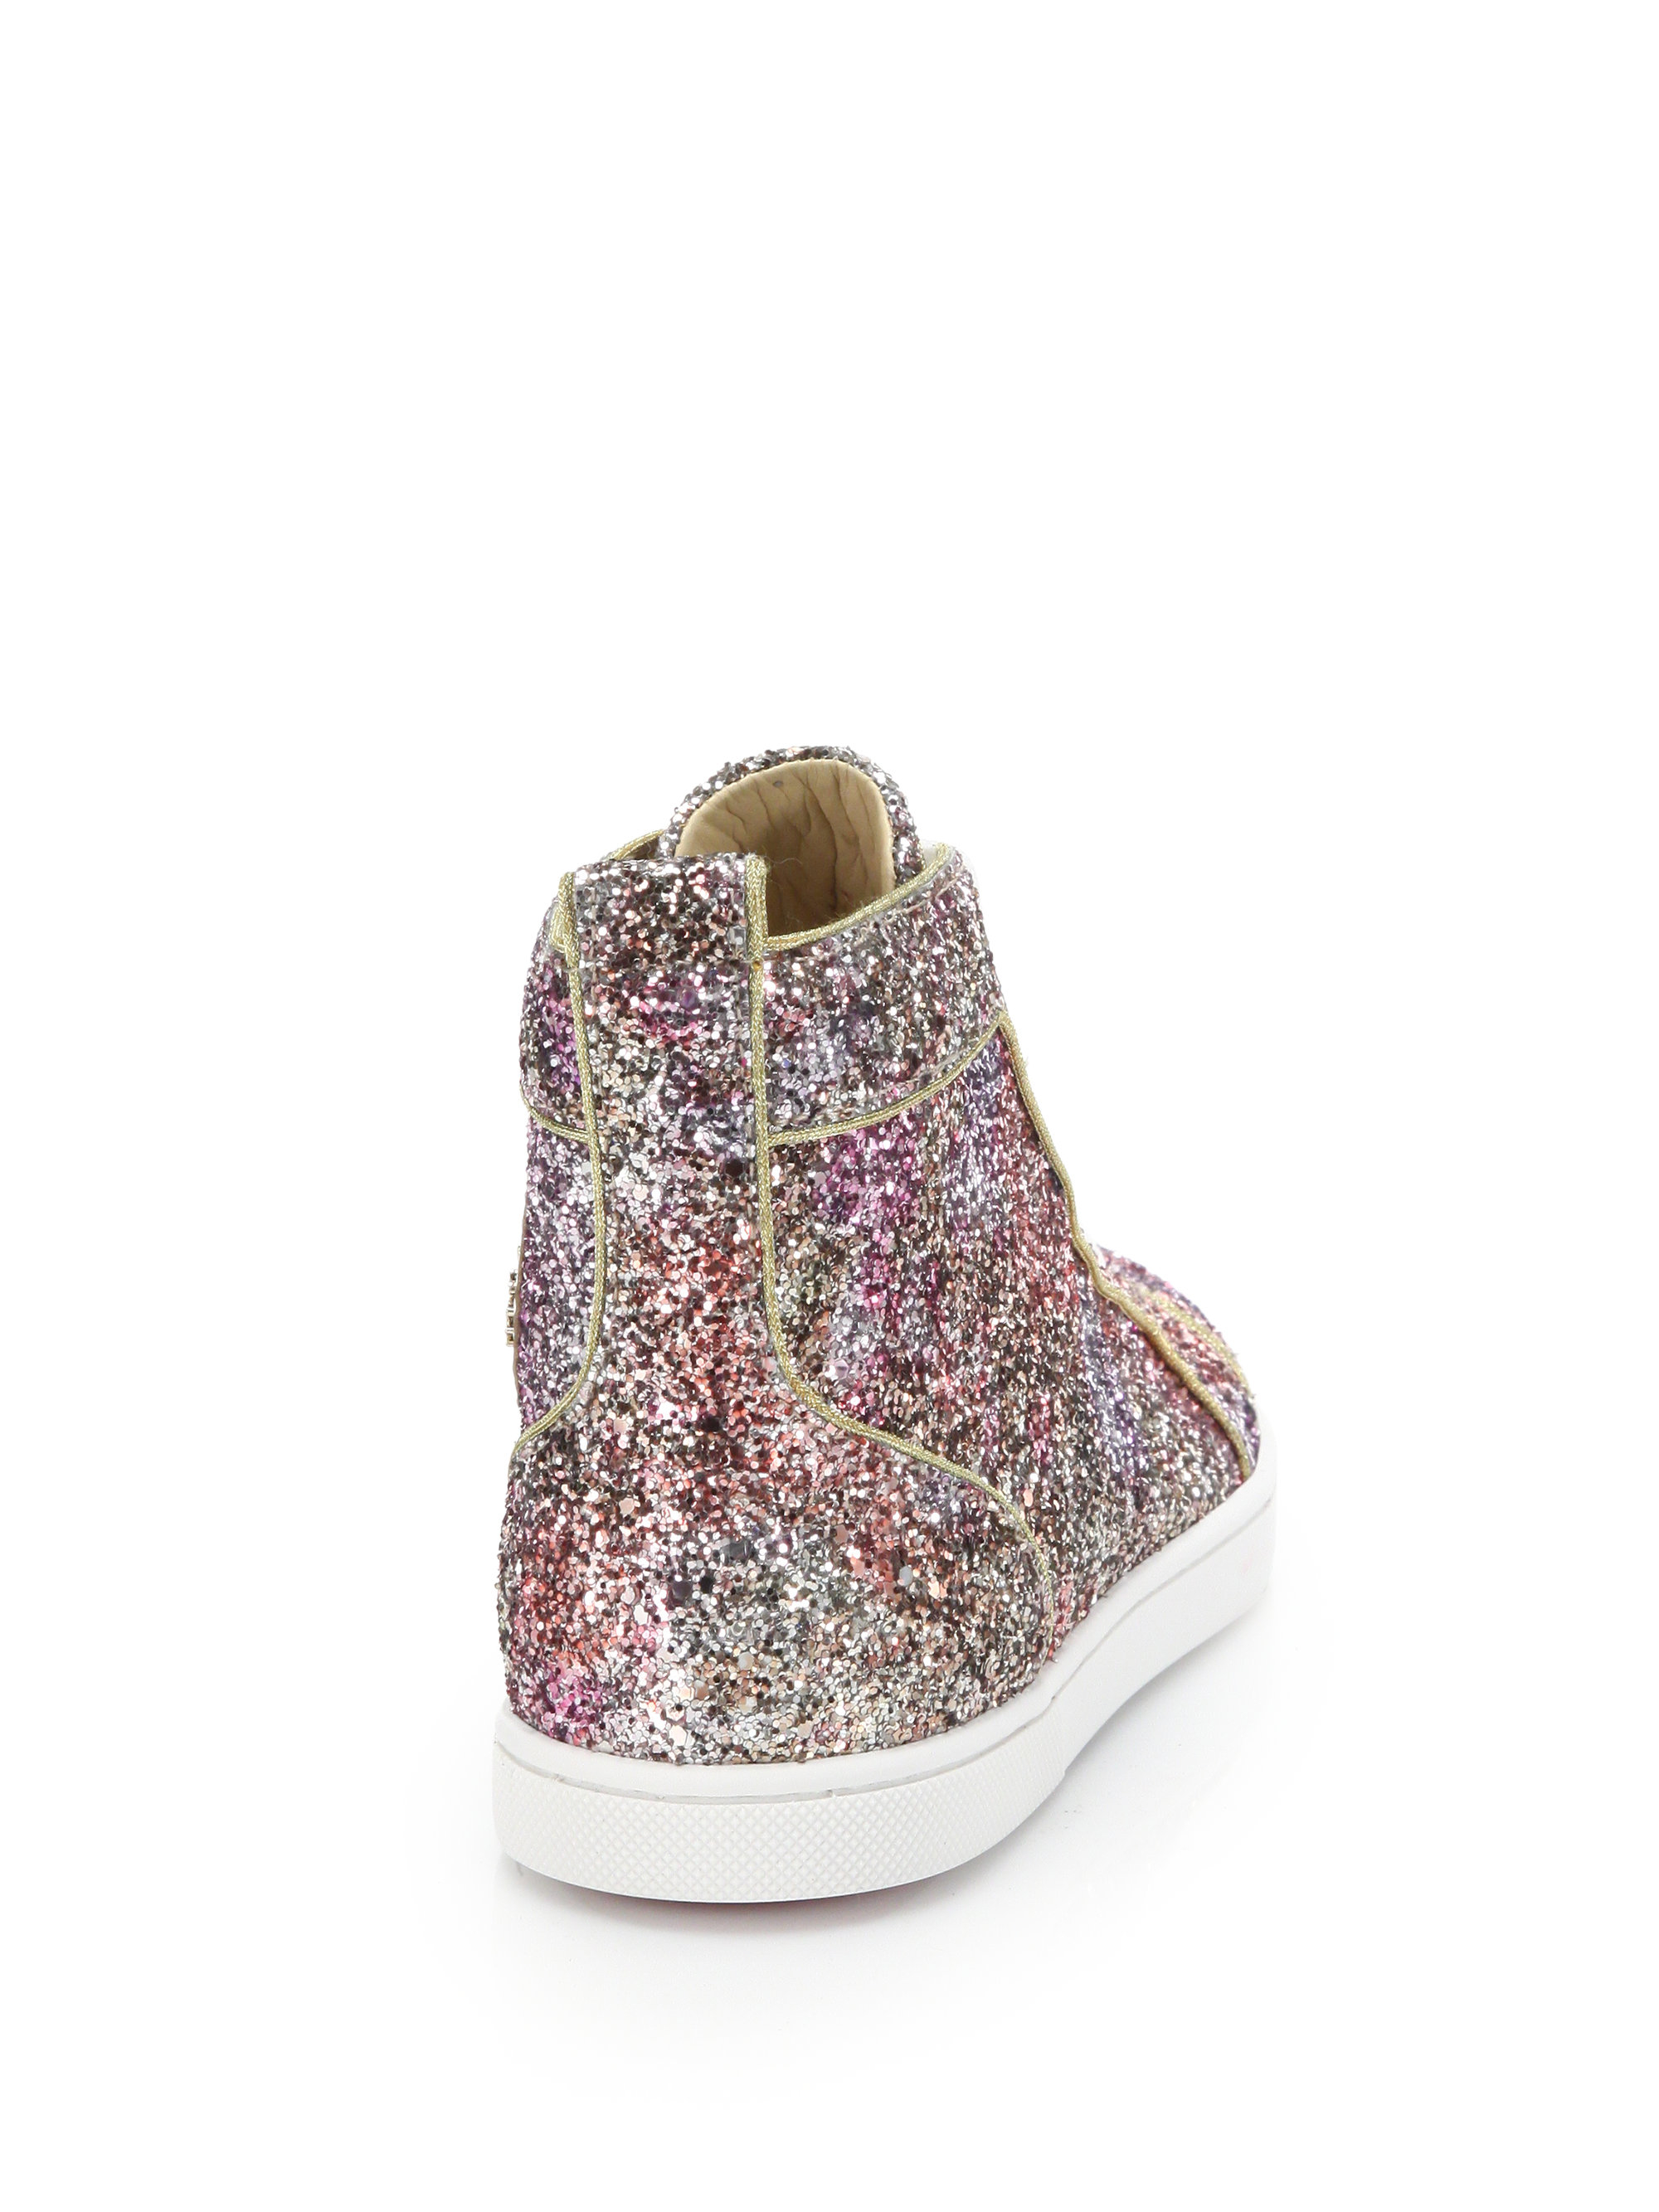 christian louboutin high-top sneakers black, blue and multicolor ...  